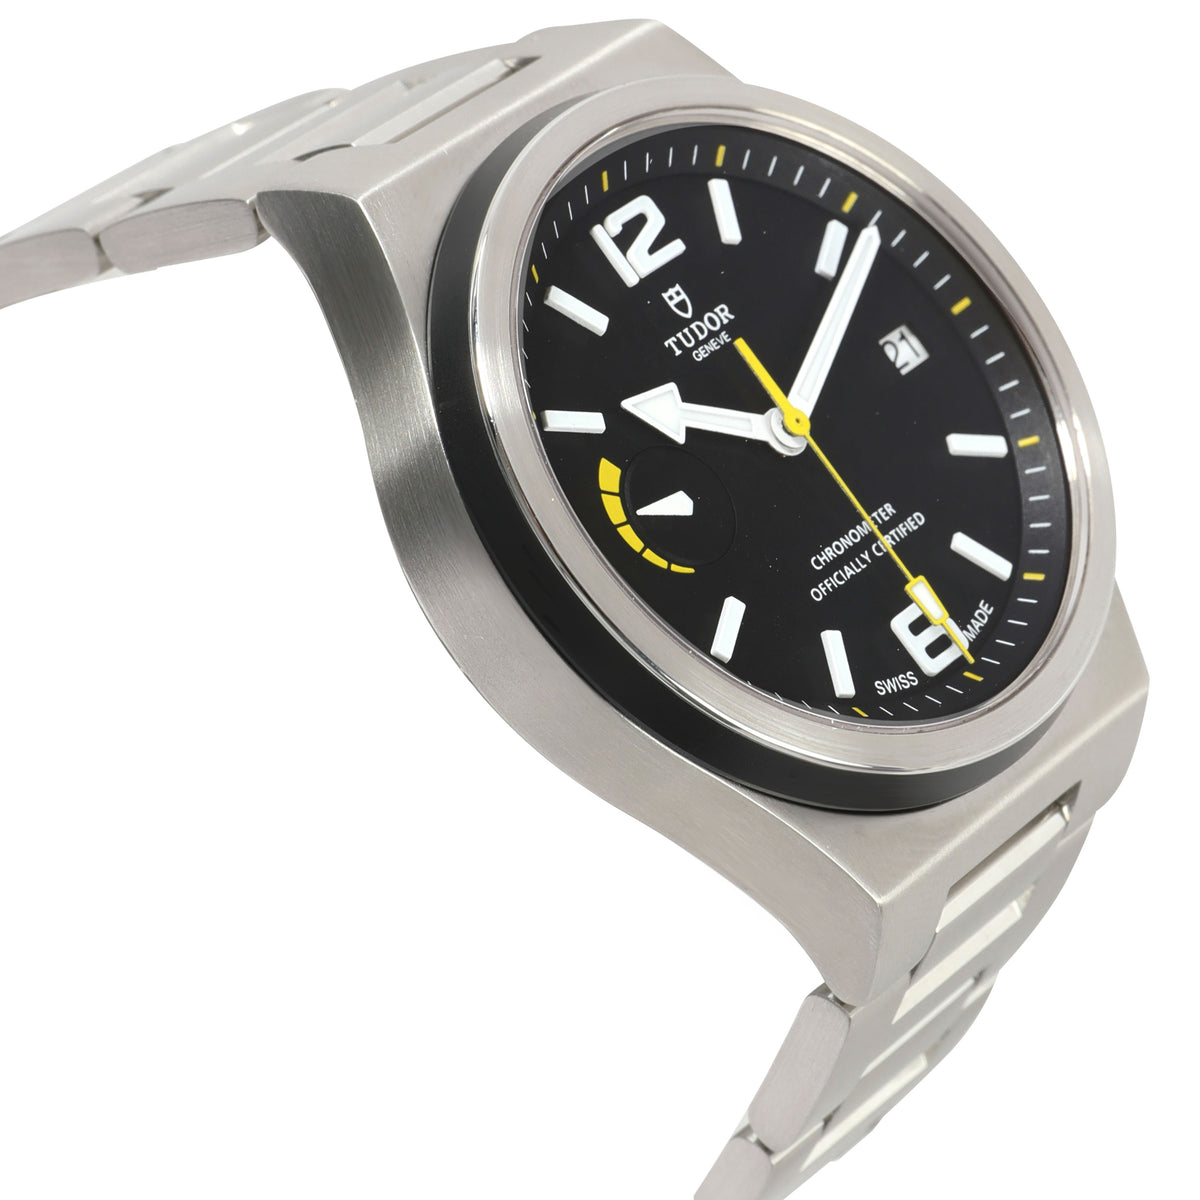 Tudor North Flag 91219 Men's Watch in  Stainless Steel